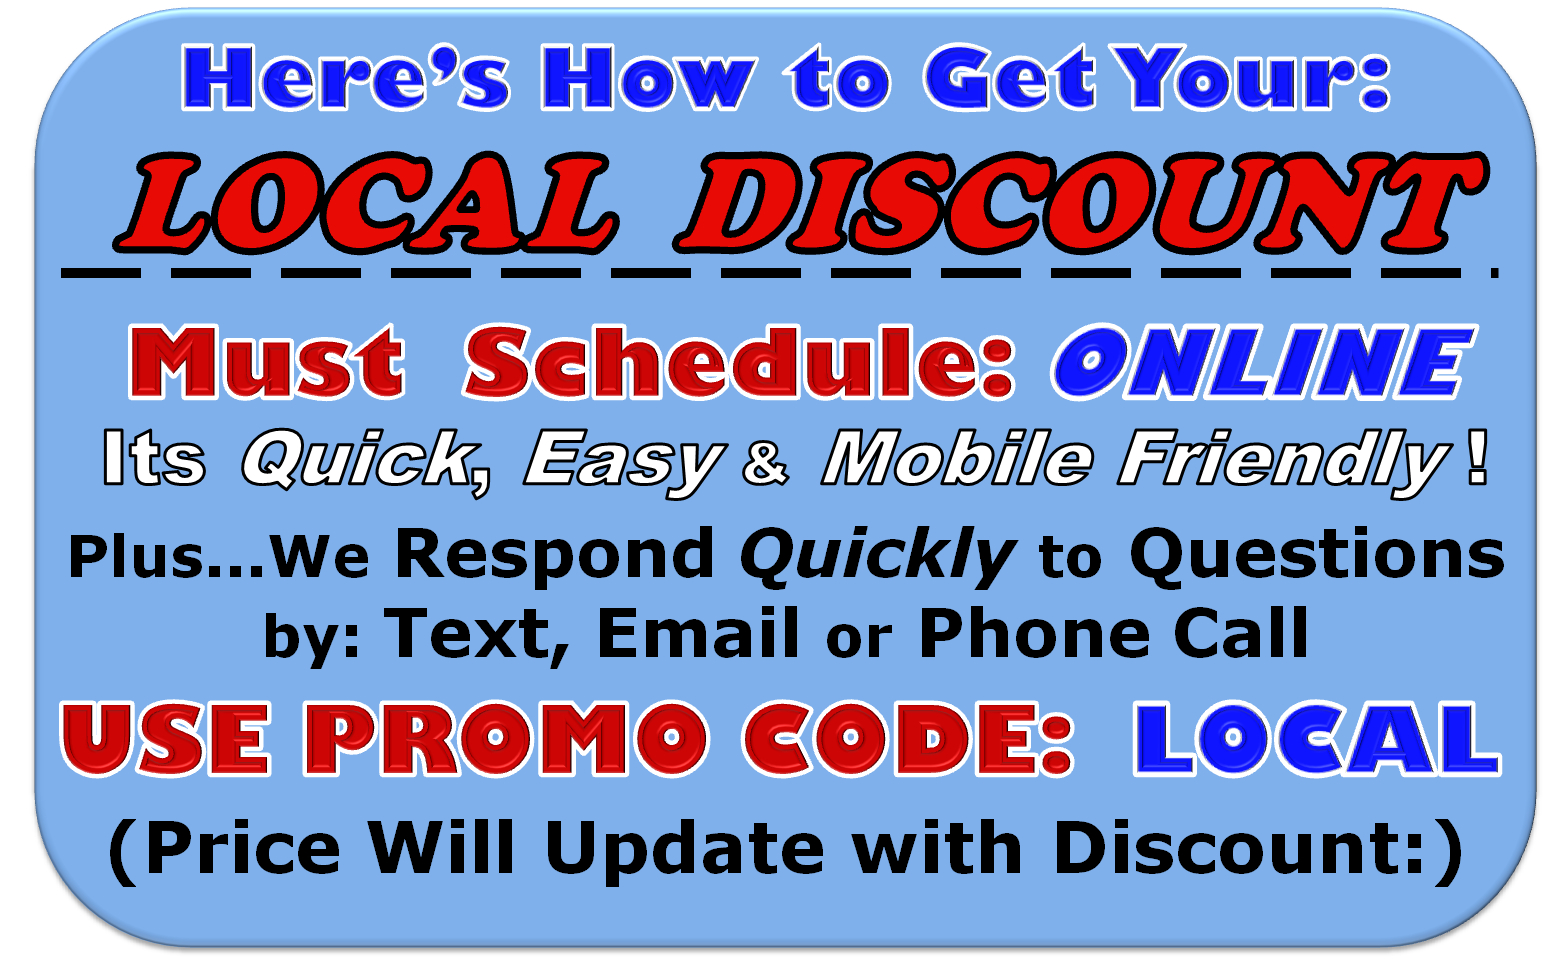 Get Local discount Here1556x980